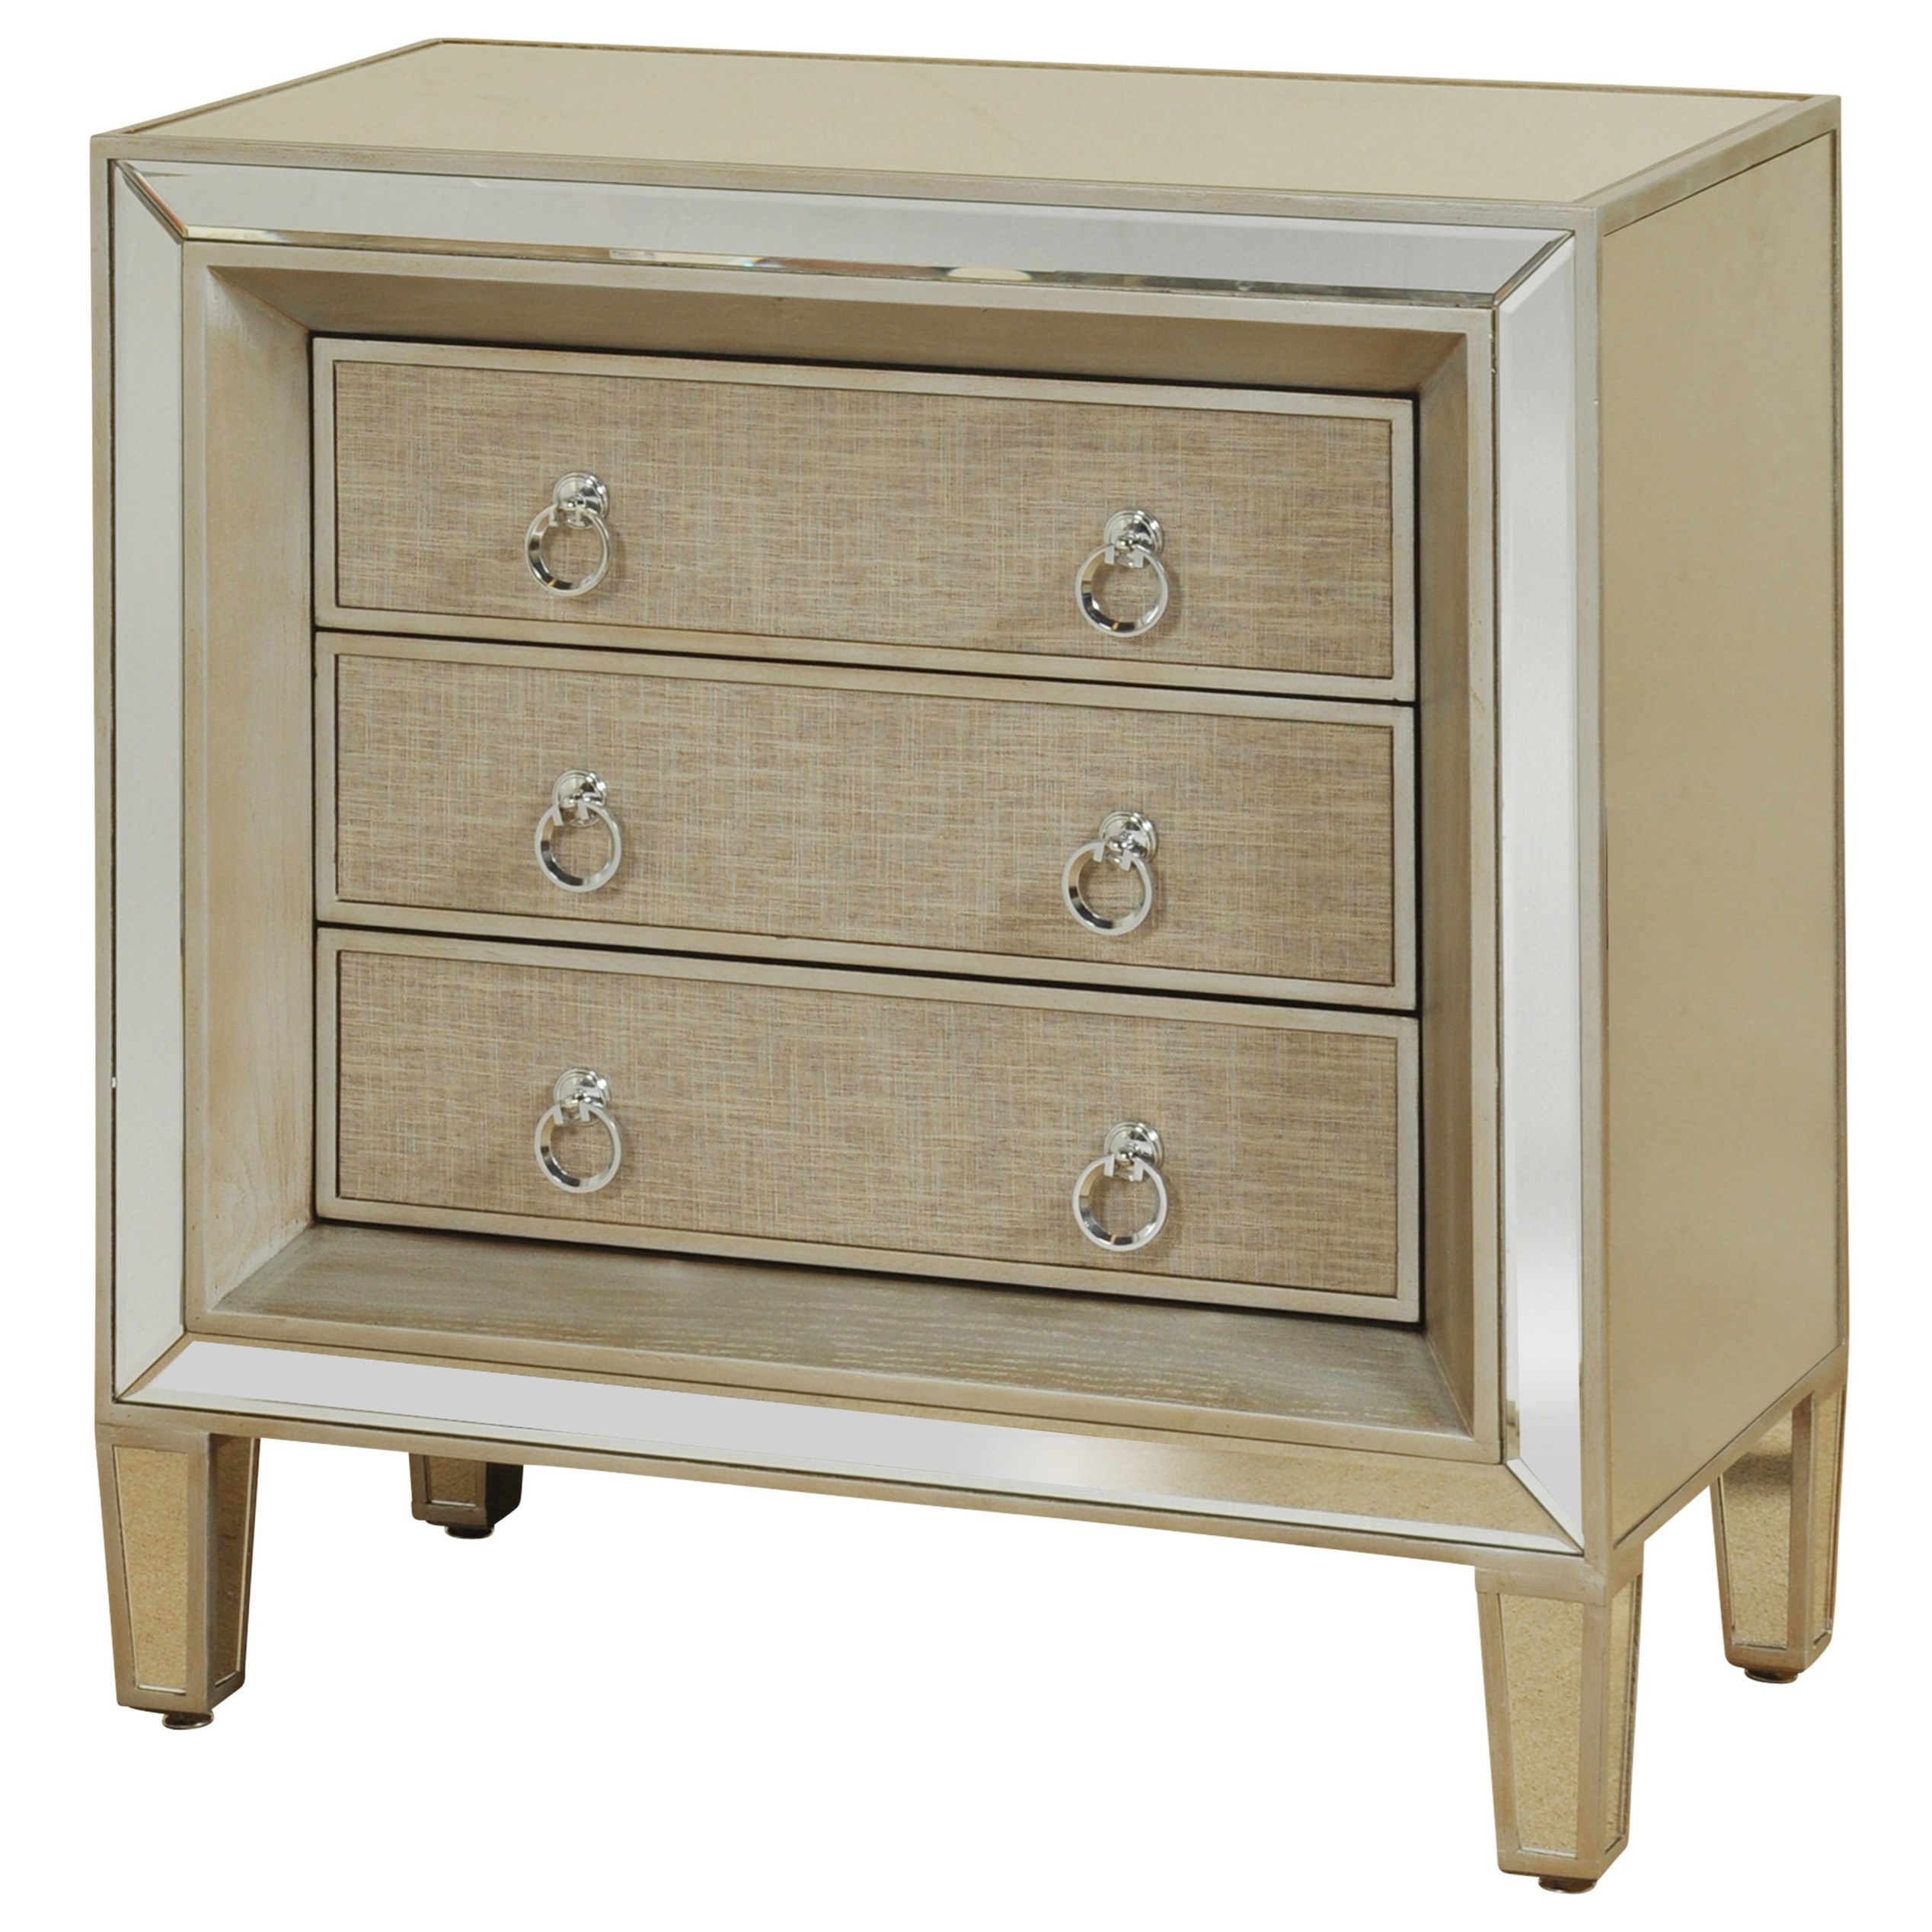 Mirrored 3 Drawer Chest with Linen Covered Drawers